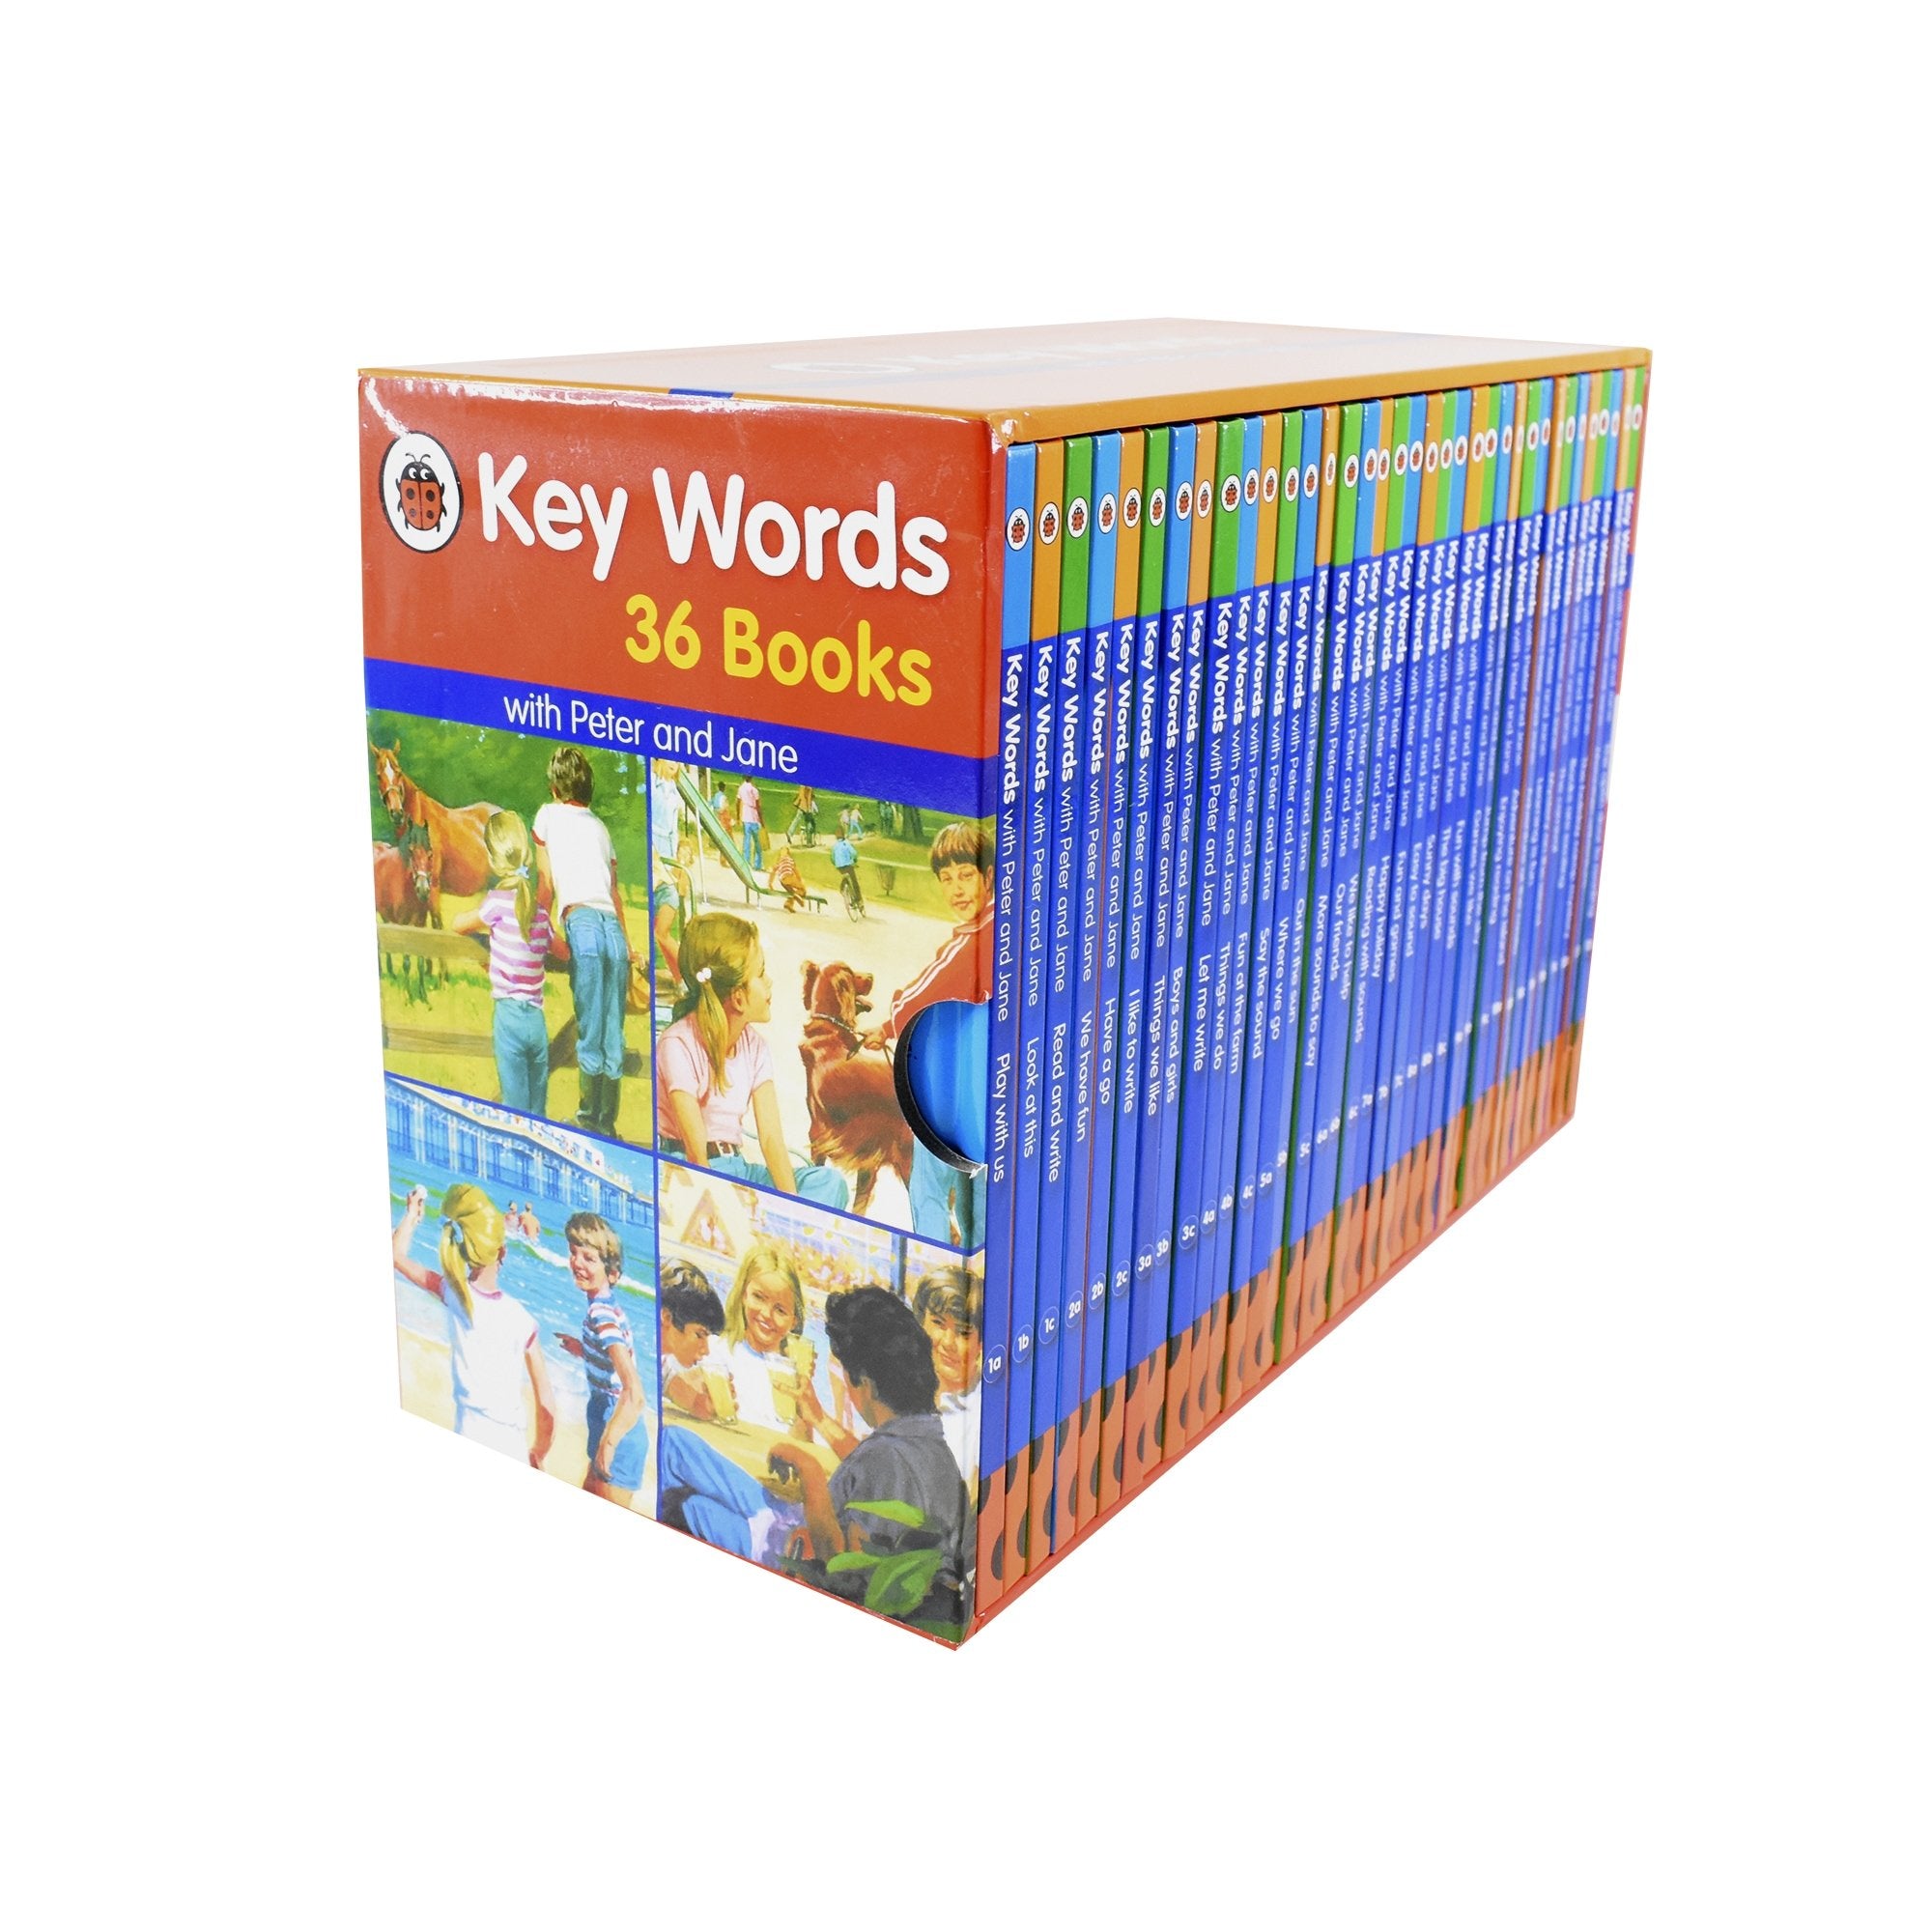 Ladybird Key Words with Peter and Jane 36 Books Box Set - Ages 5-7 